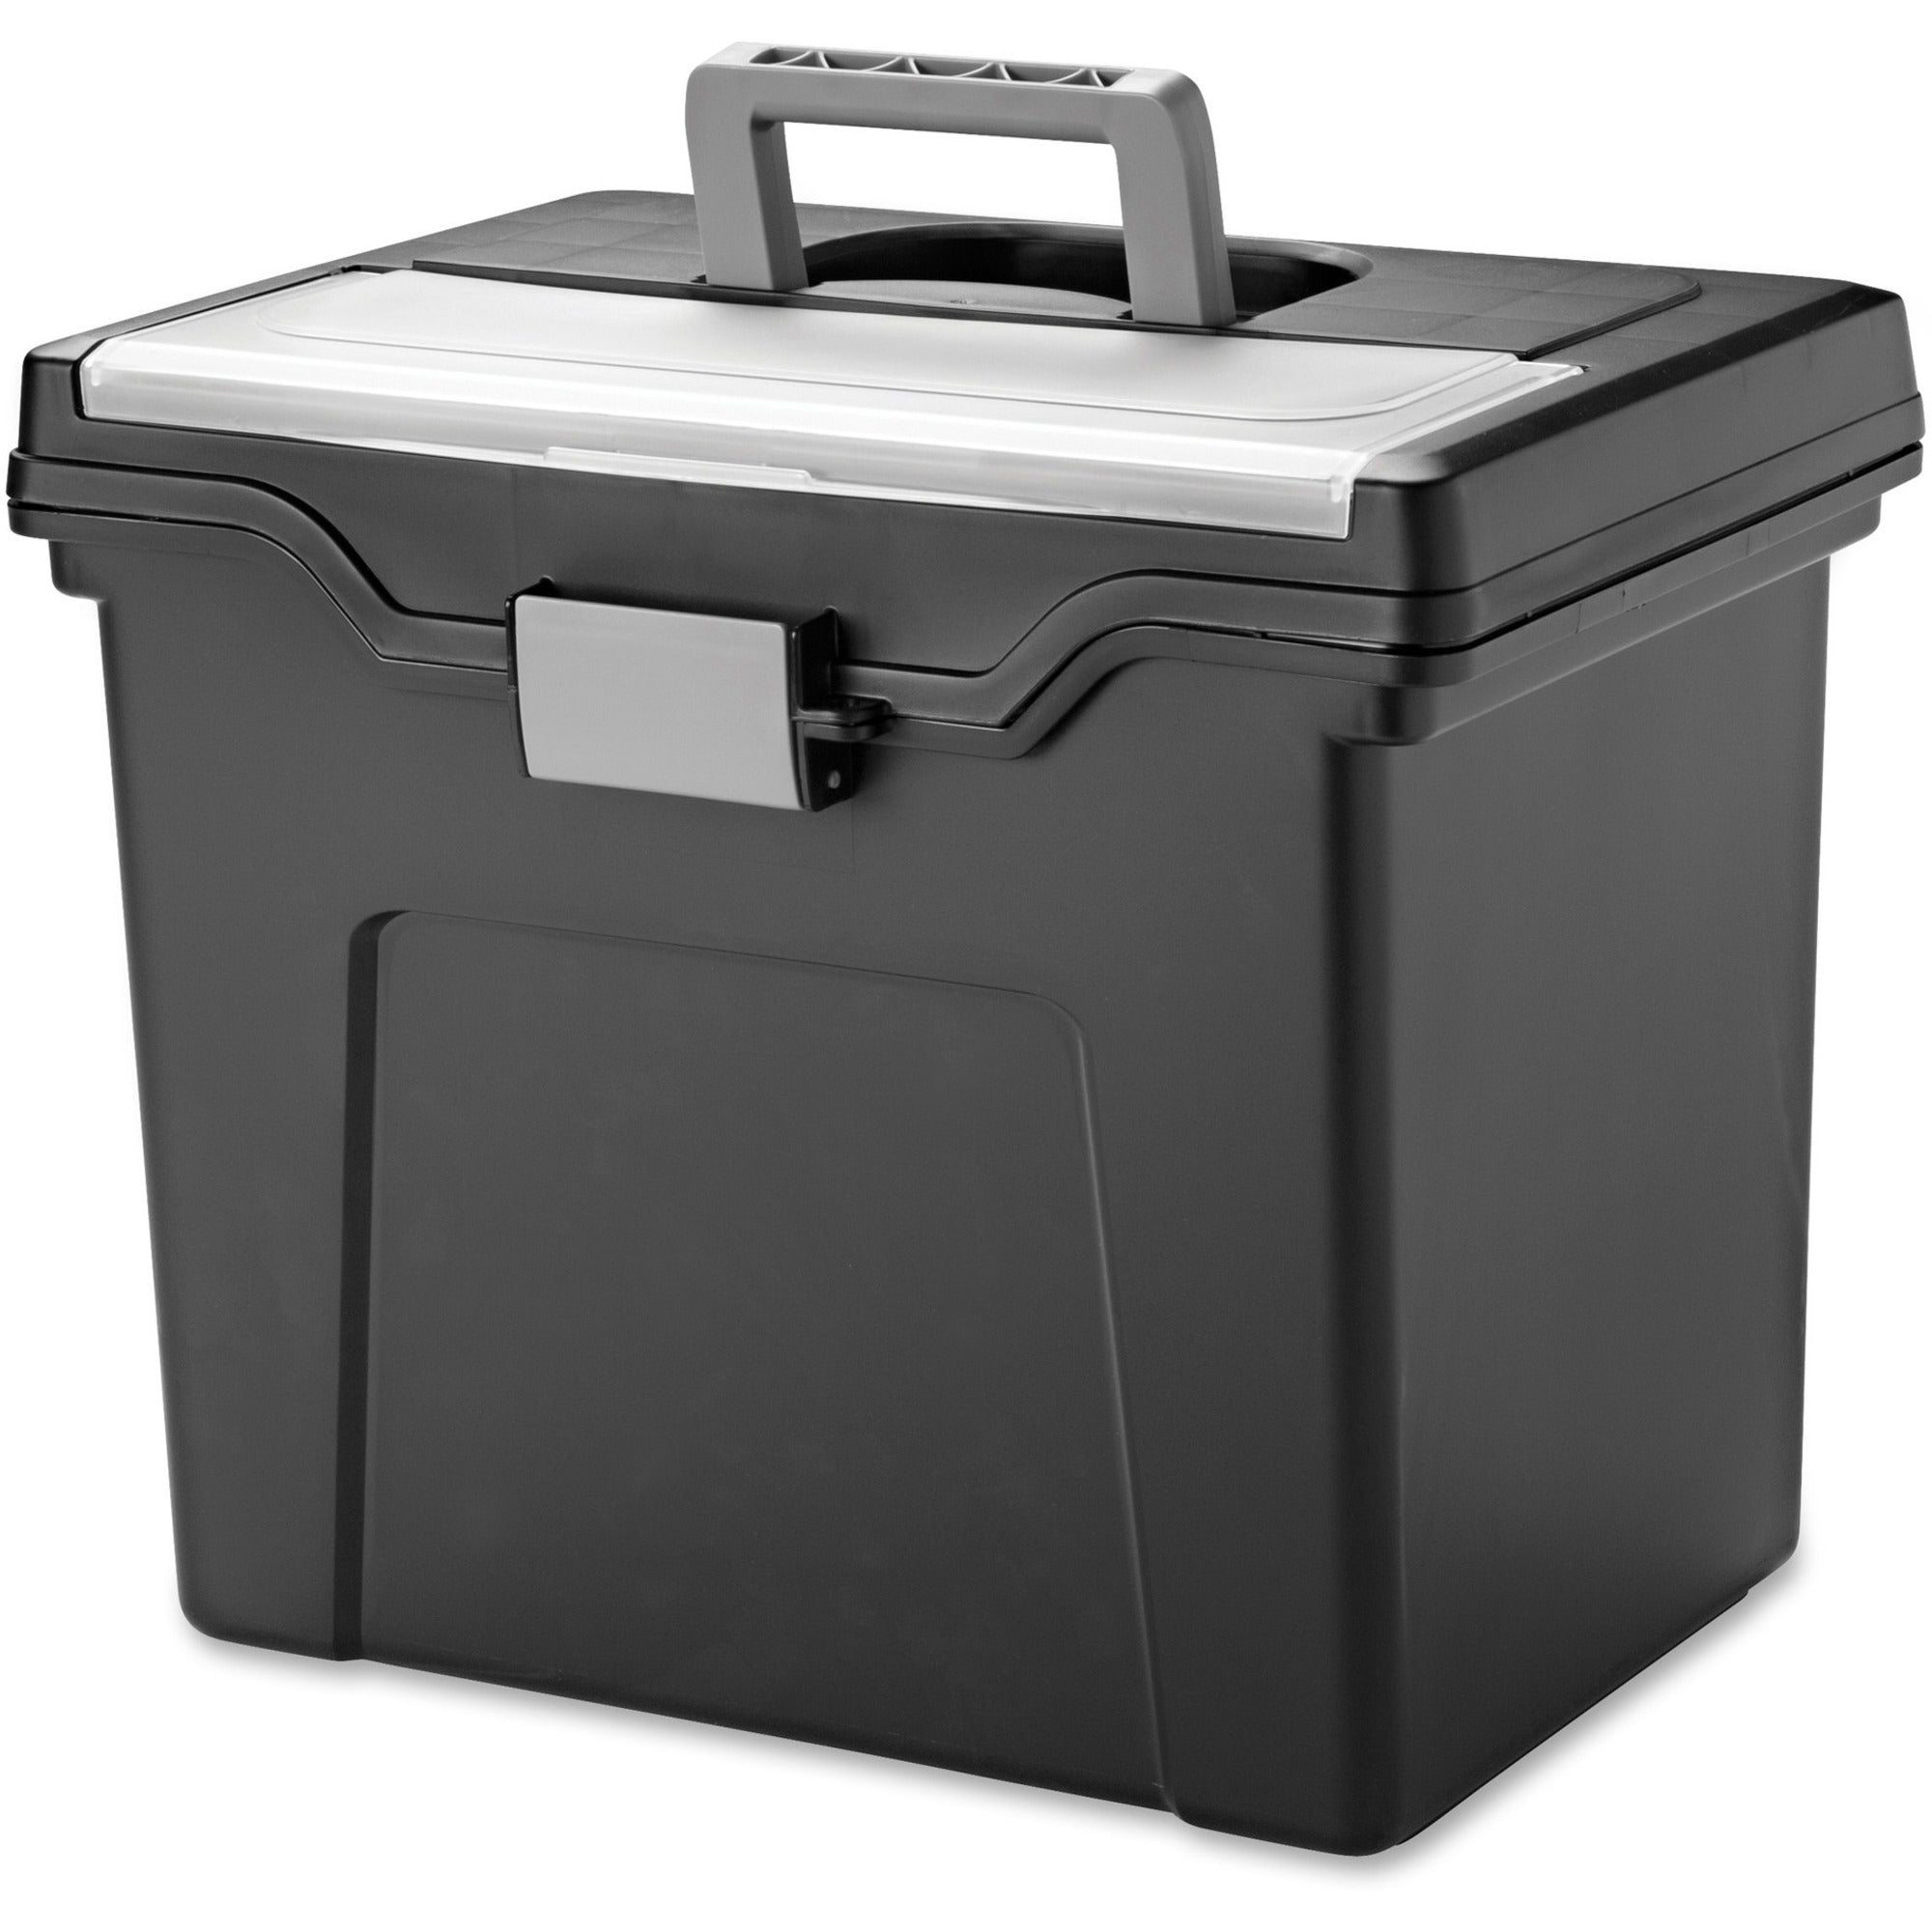 IRIS Portable Letter-size File Box - External Dimensions: 13.8" Length x 10.2" Width x 11.7" Height - Media Size Supported: Letter 8.50" x 11" - Buckle Closure - Black - For Pen/Pencil, Business Card, Hanging Folder - 1 Each - 